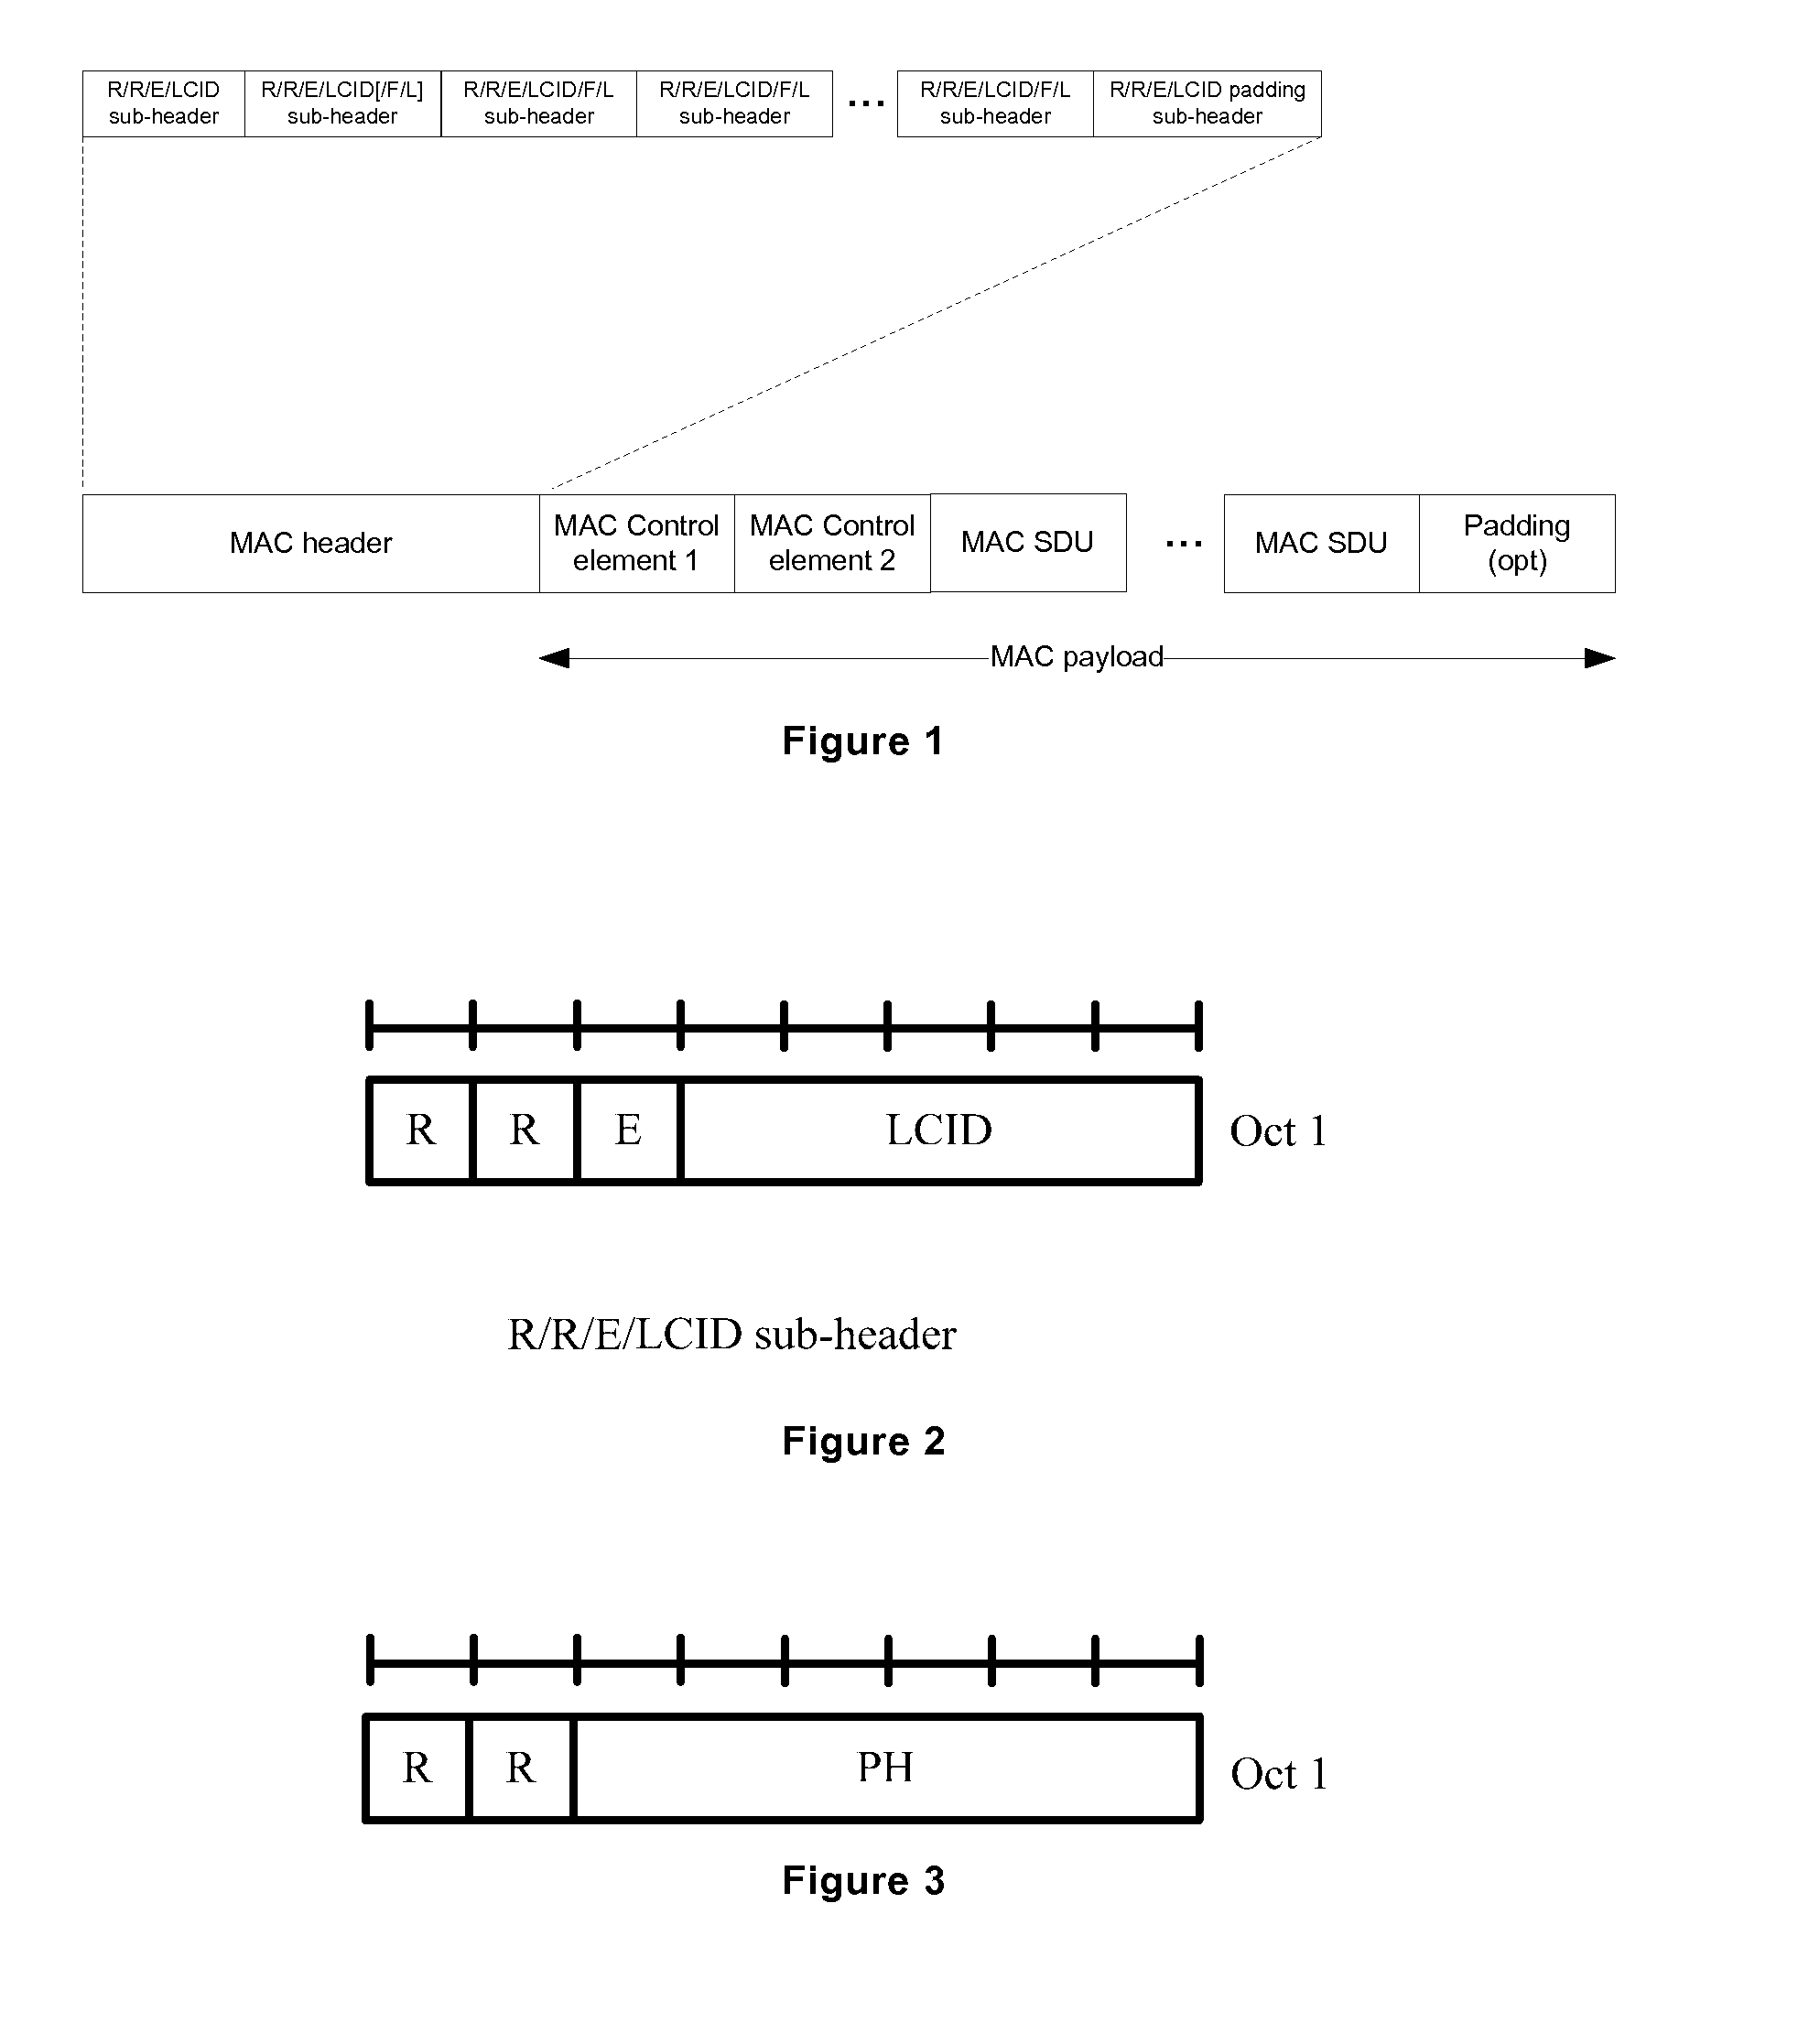 Method and apparatus for reporting power headroom in carrier aggregation scenario